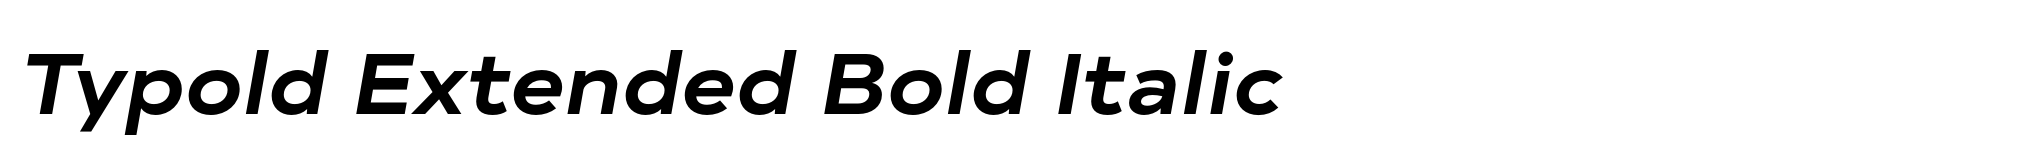 Typold Extended Bold Italic image